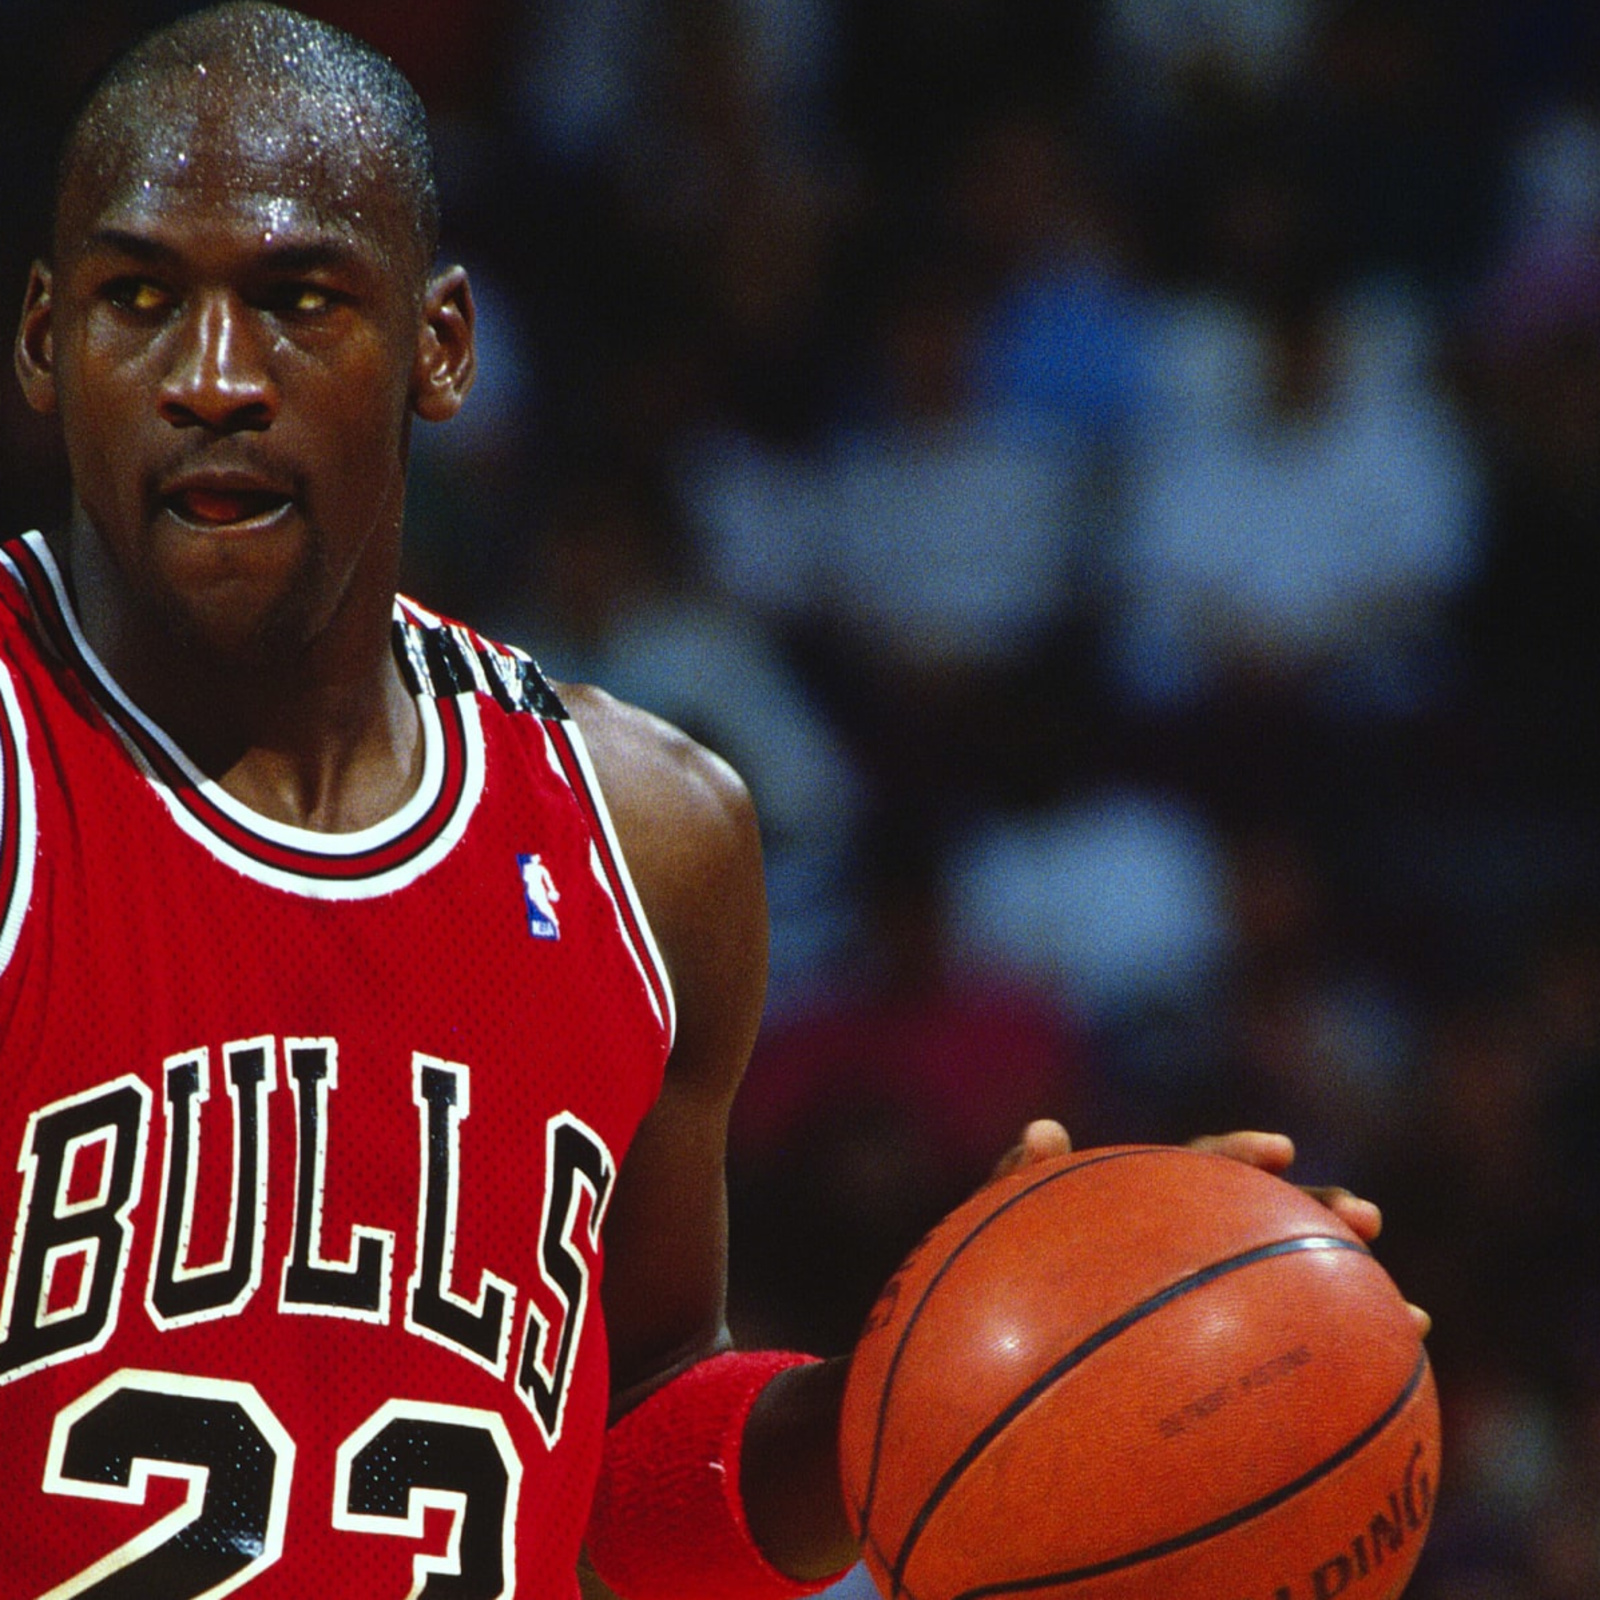 Dream Team Shoes Signed by Michael Jordan Up for Auction